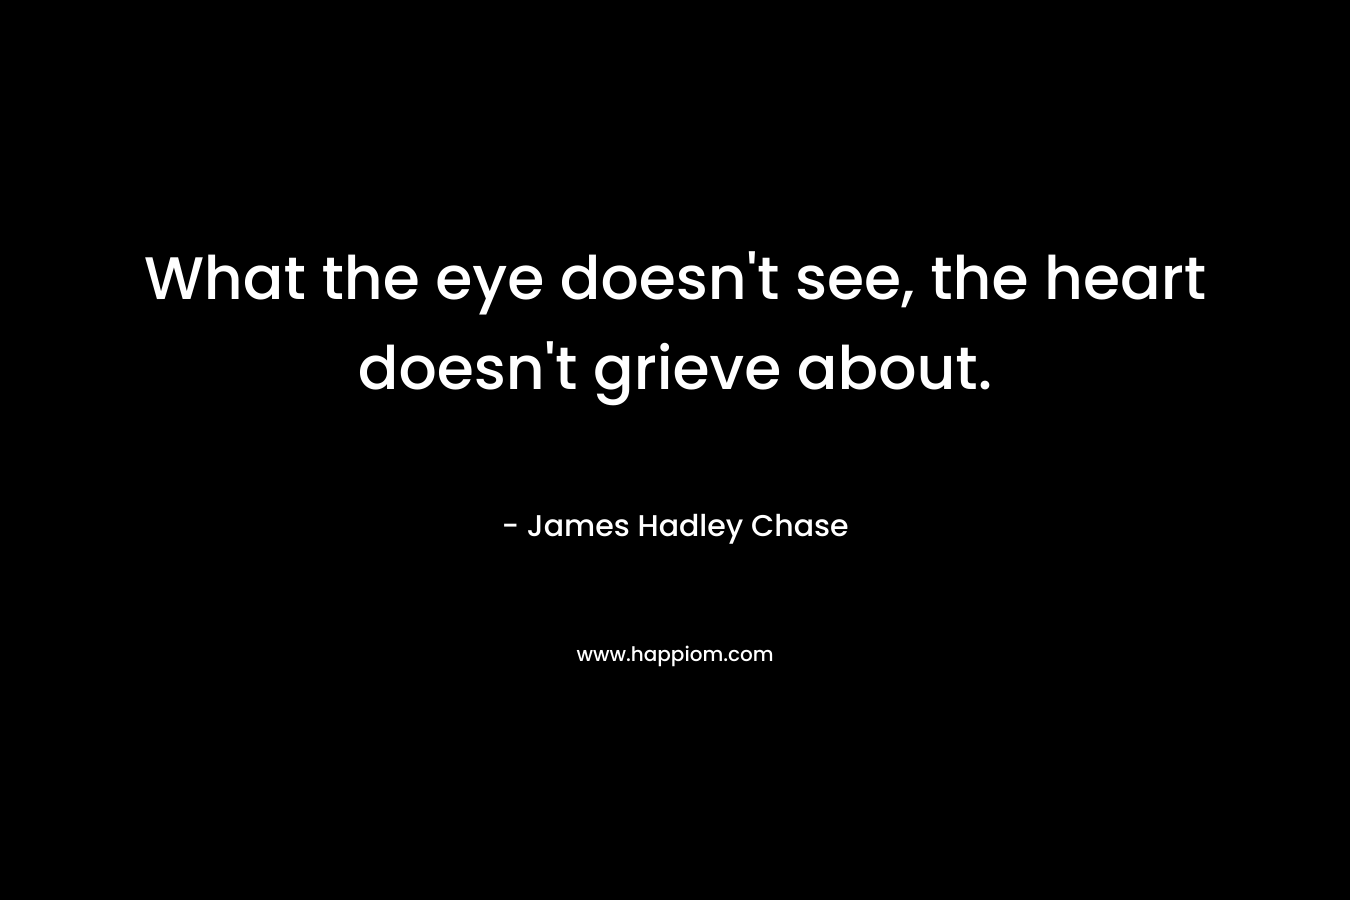 What the eye doesn't see, the heart doesn't grieve about.